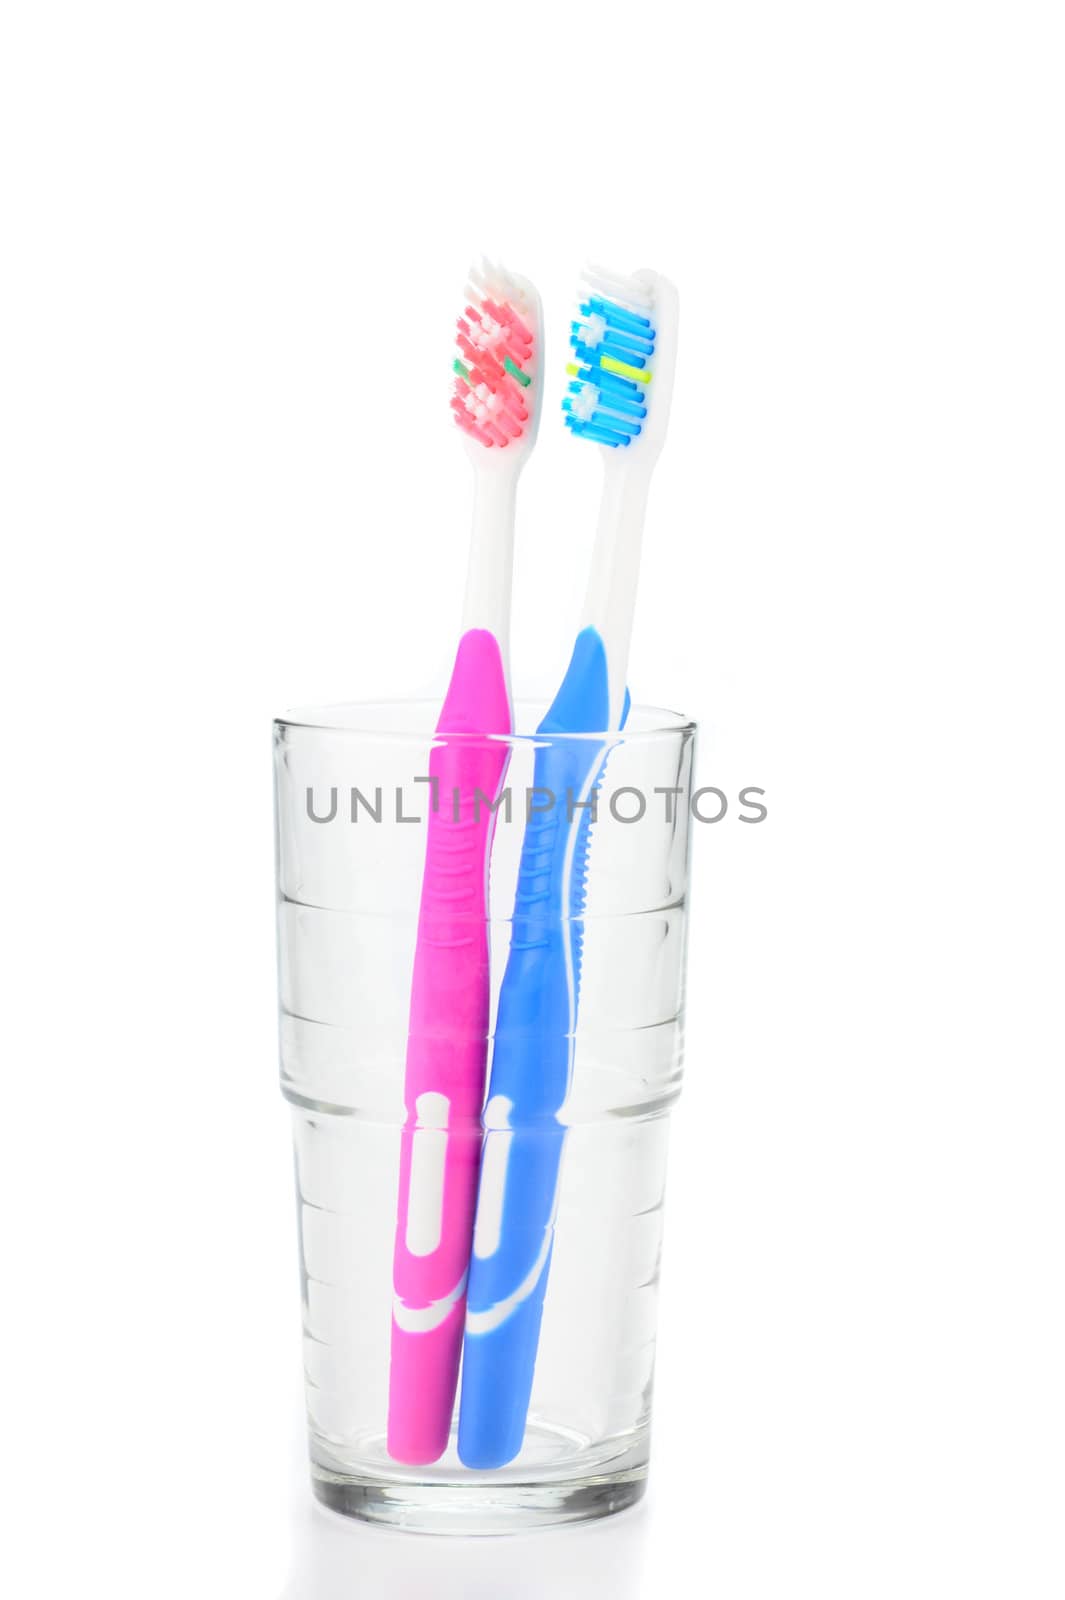 Toothbrushes by billberryphotography